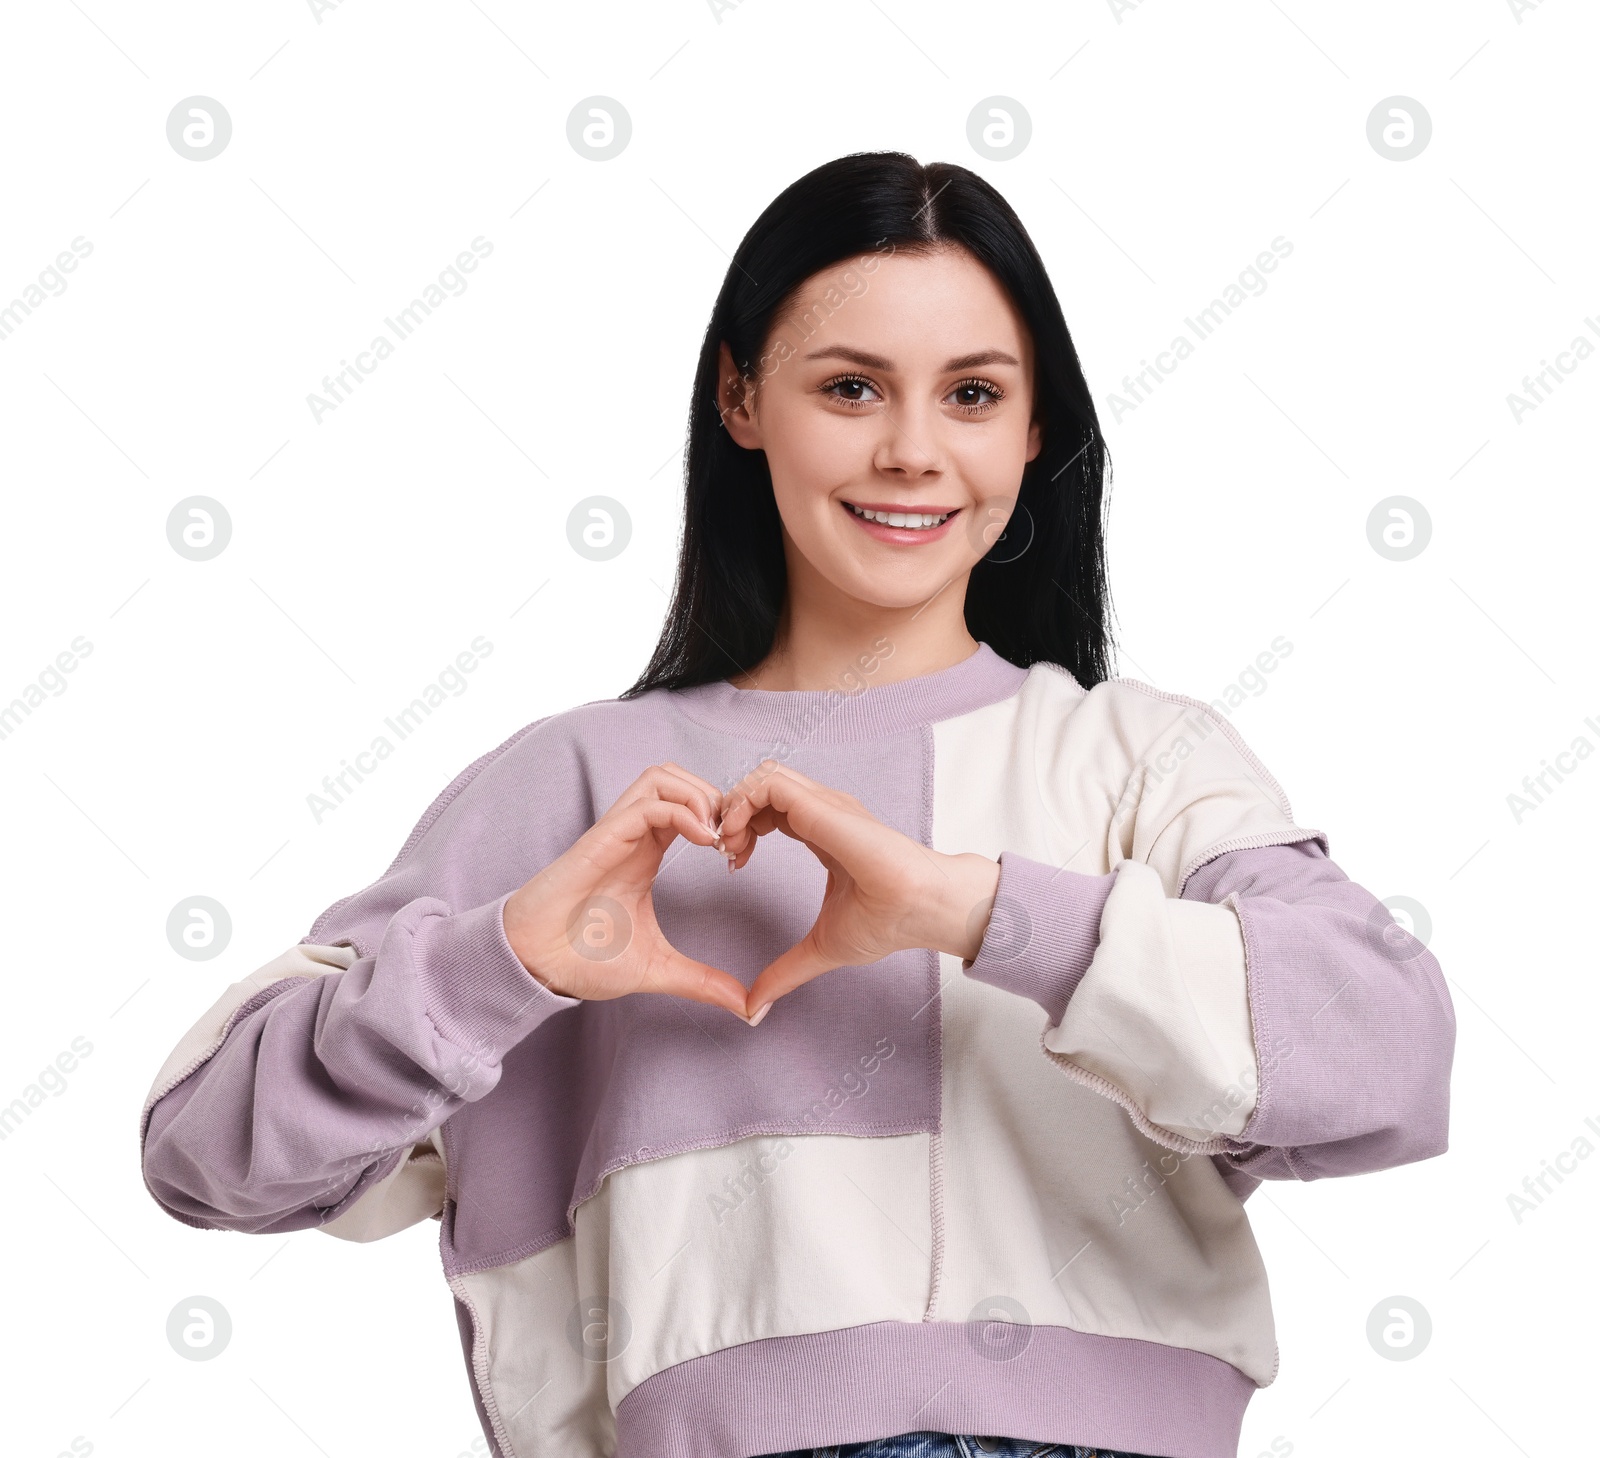 Photo of Smiling woman showing heart gesture with hands on white background